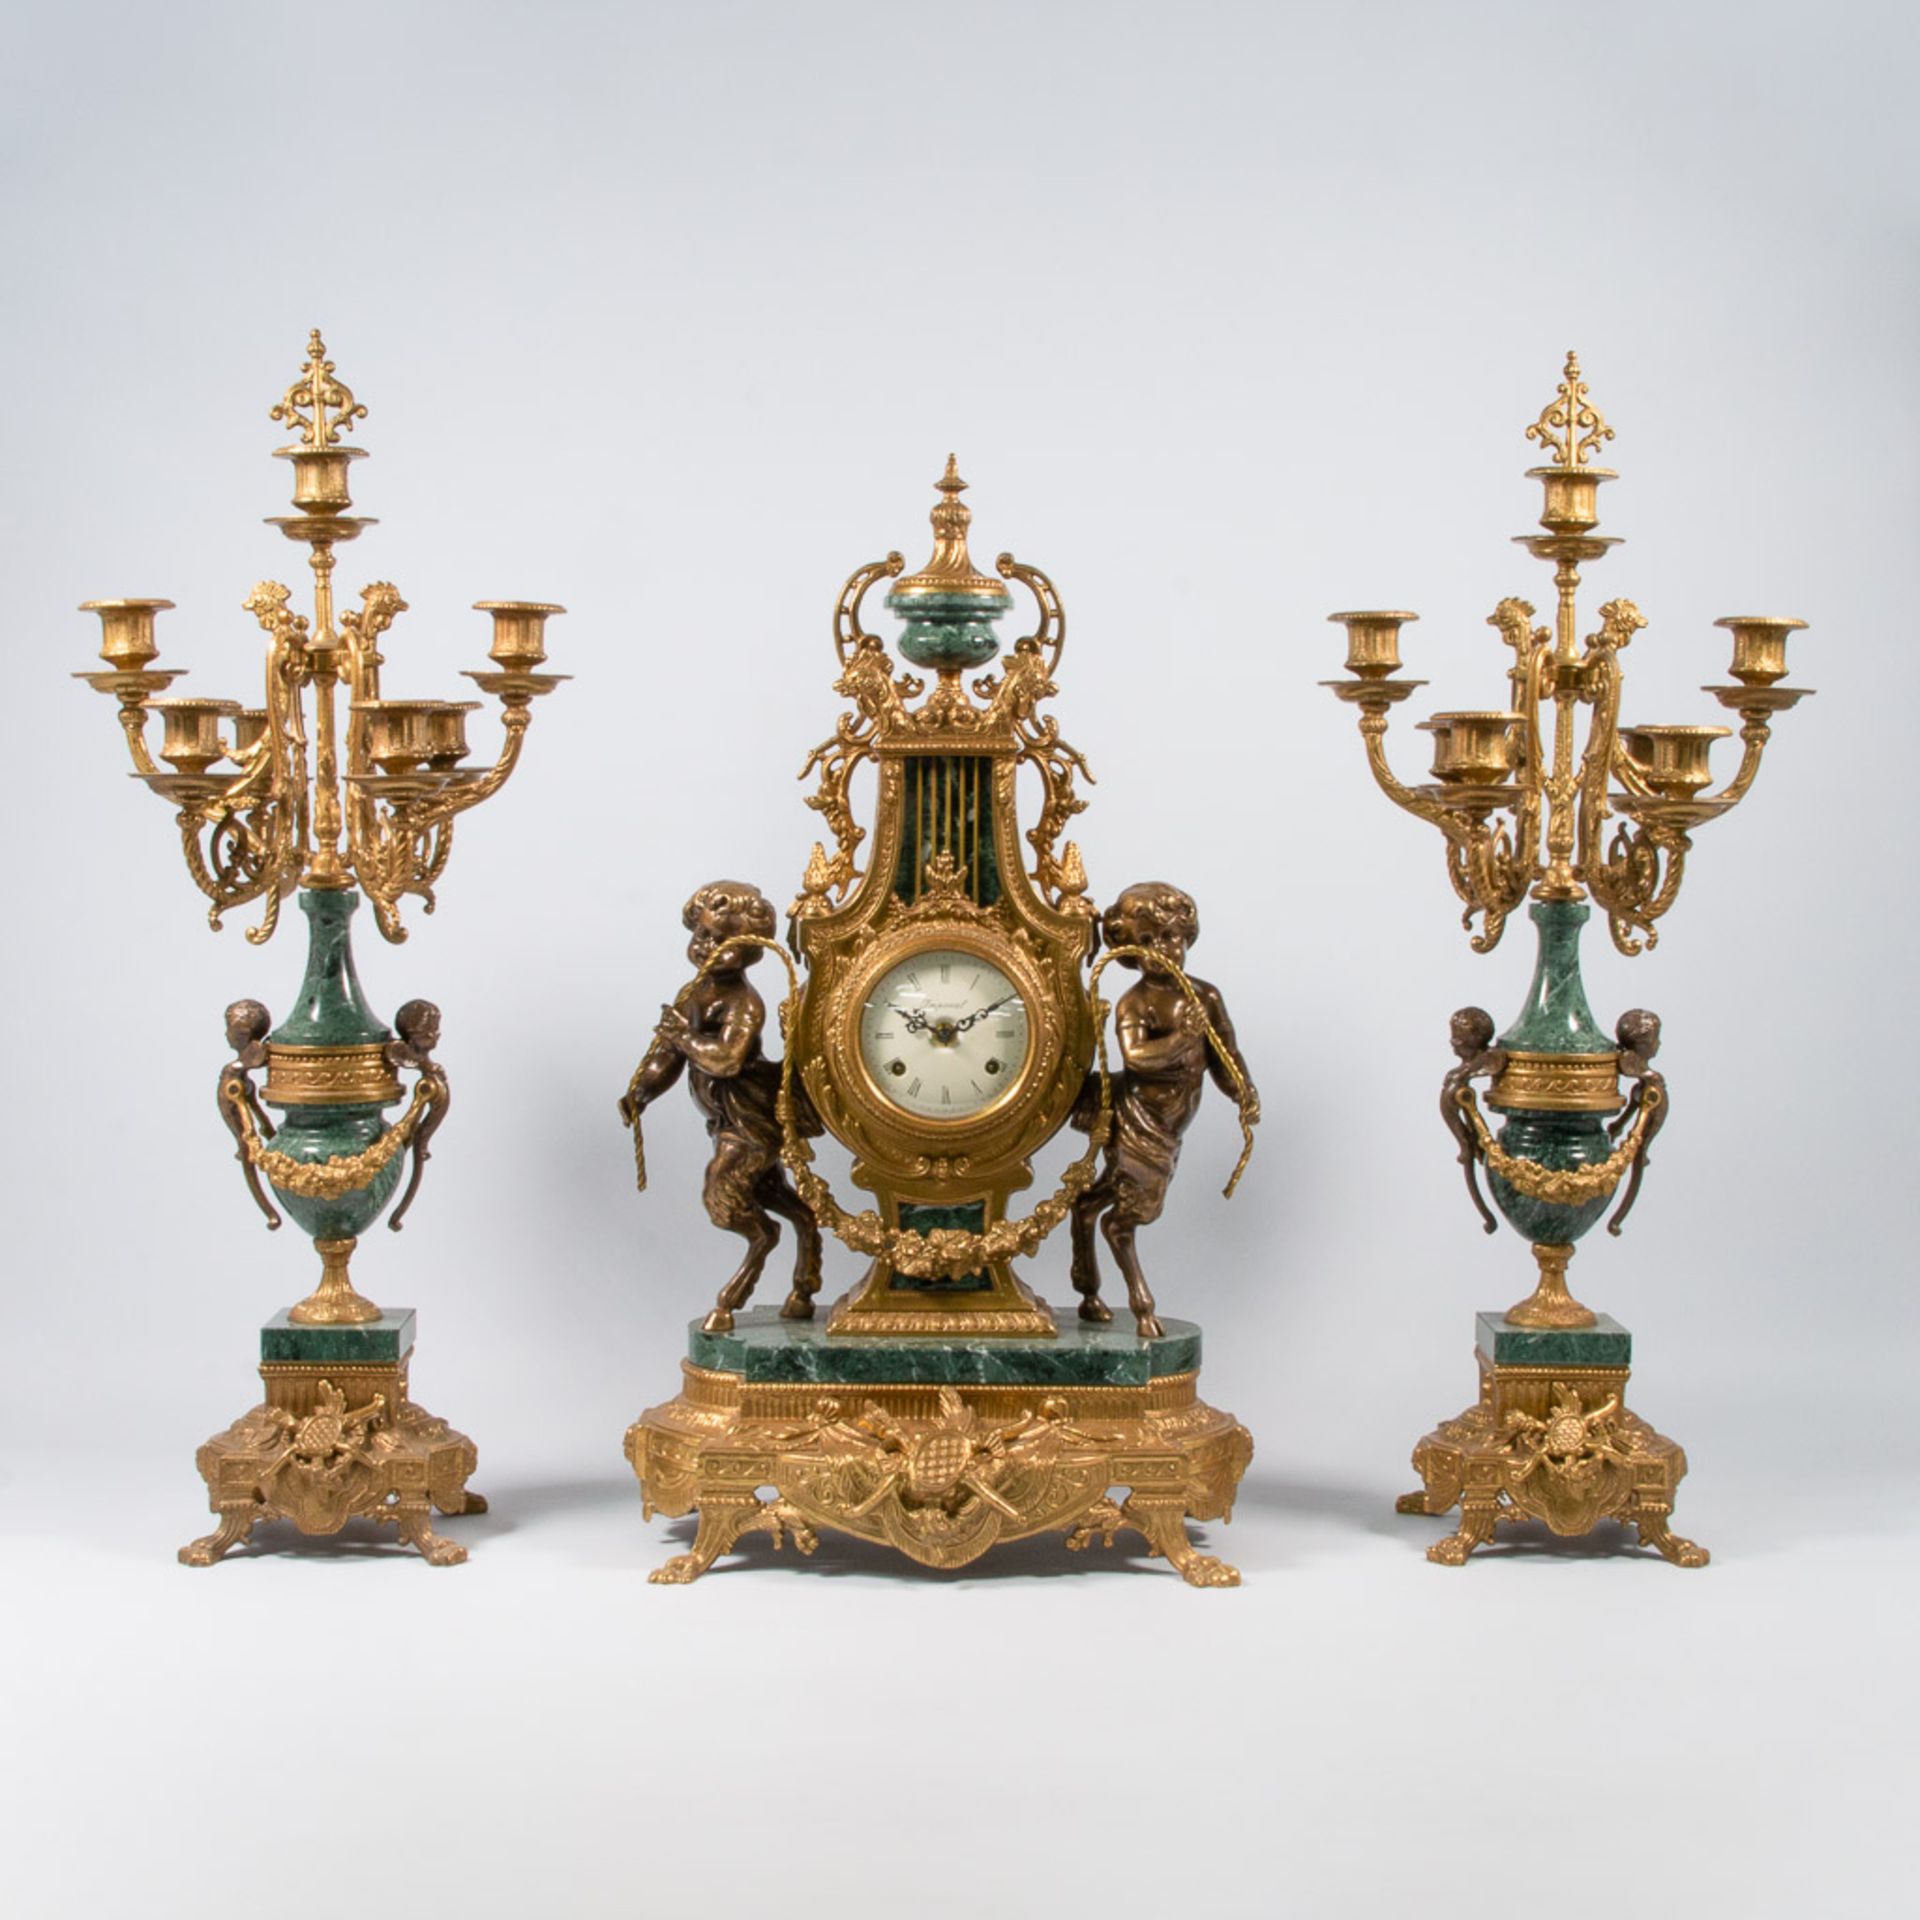 An Empire style 3-piece mantle clock with green marble and bronze.